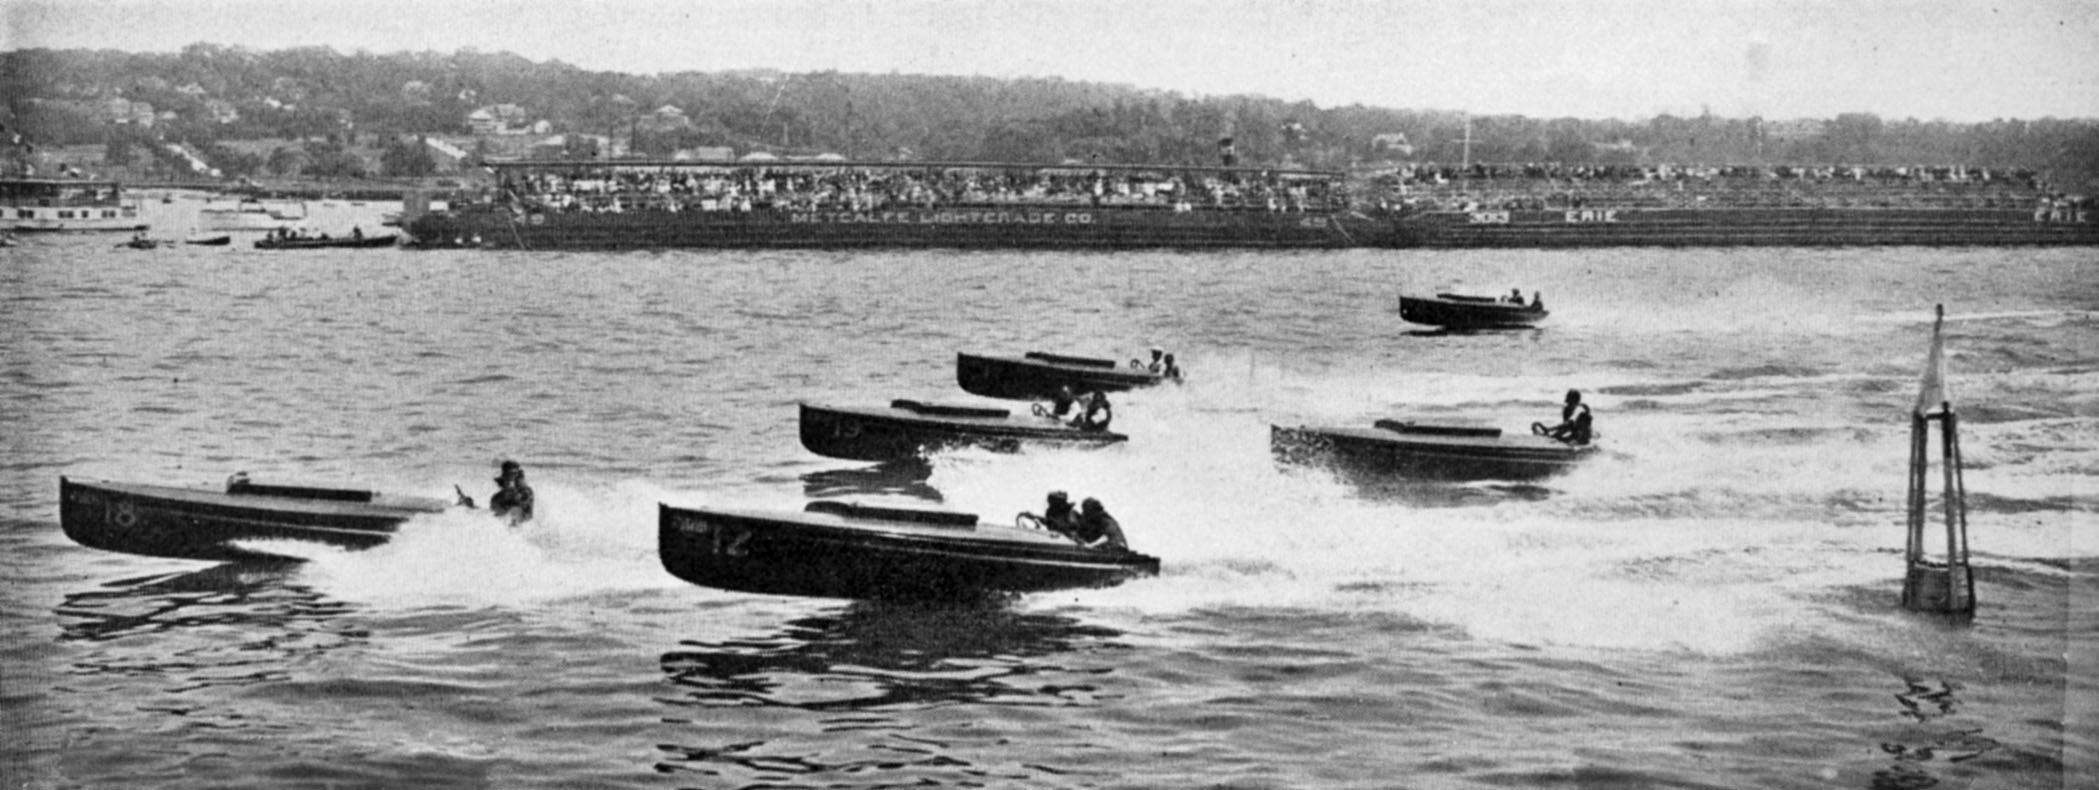 The Miami Beach One-Design Class furnished many thrills and was 
one of the most spectacular at the Regatta. Curtiss Bright won.